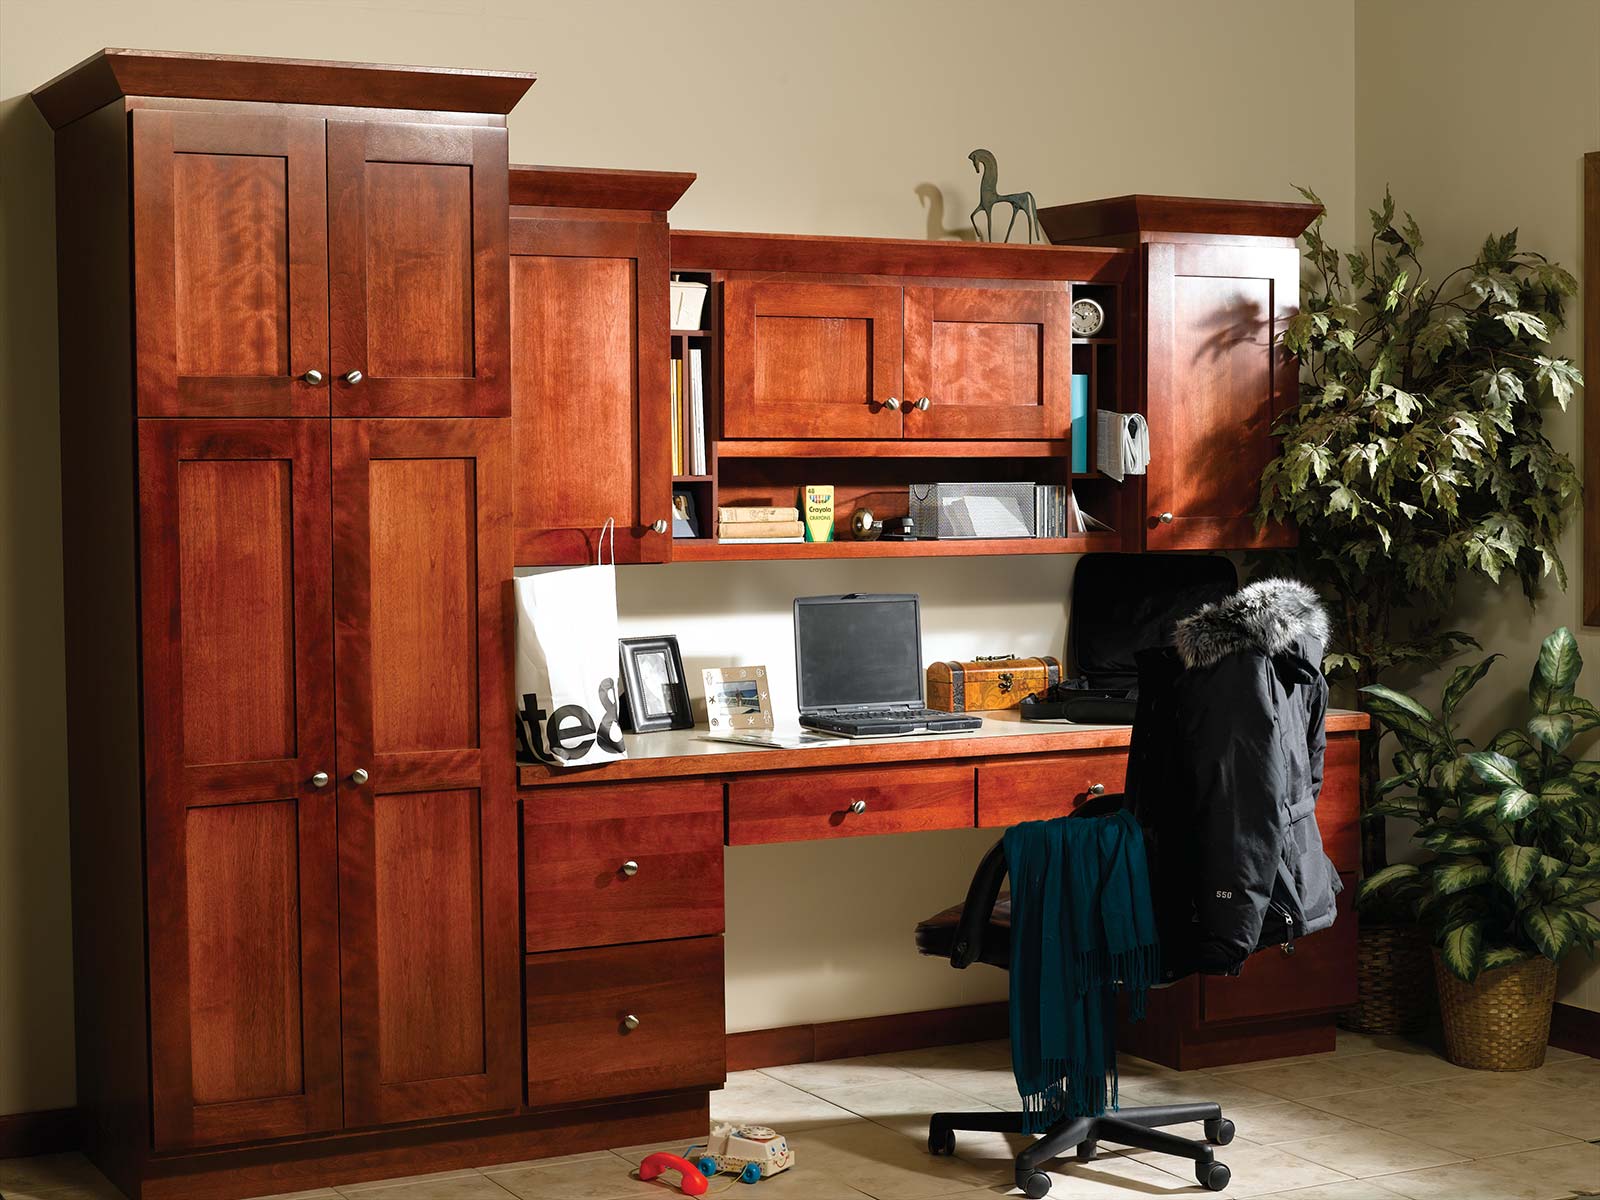 A beautiful home office space with plenty of drawers for organization.